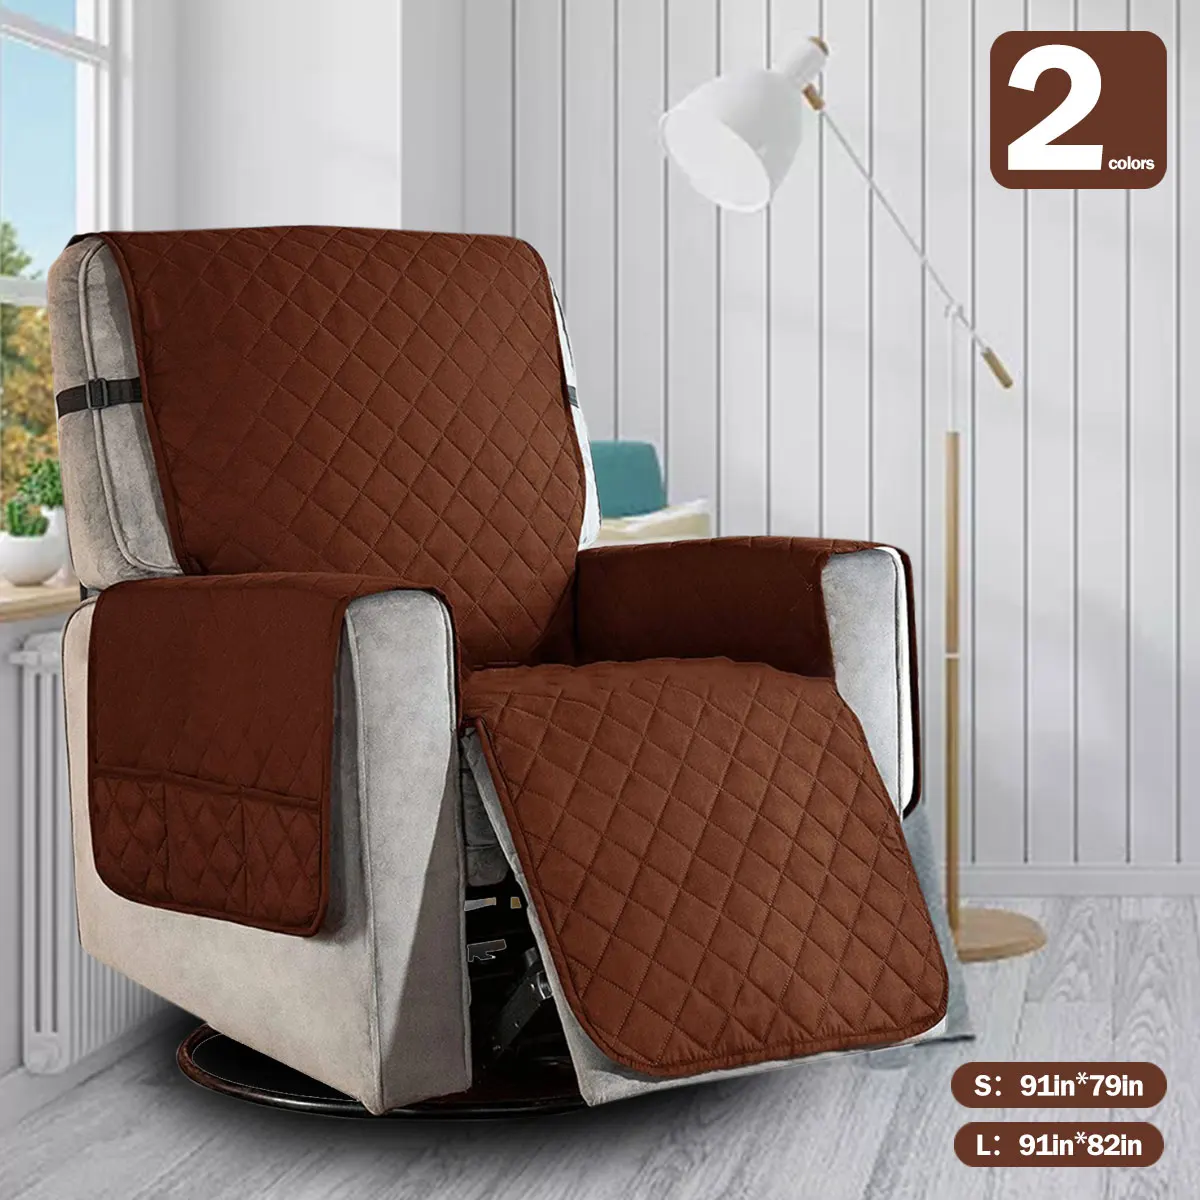 

Sofa Slipcover Recliner Couch Sofa Cover Washable Removable Towel Recliner Couch Cushion Slipcovers Dog Cat Pet Protect Seat Mat